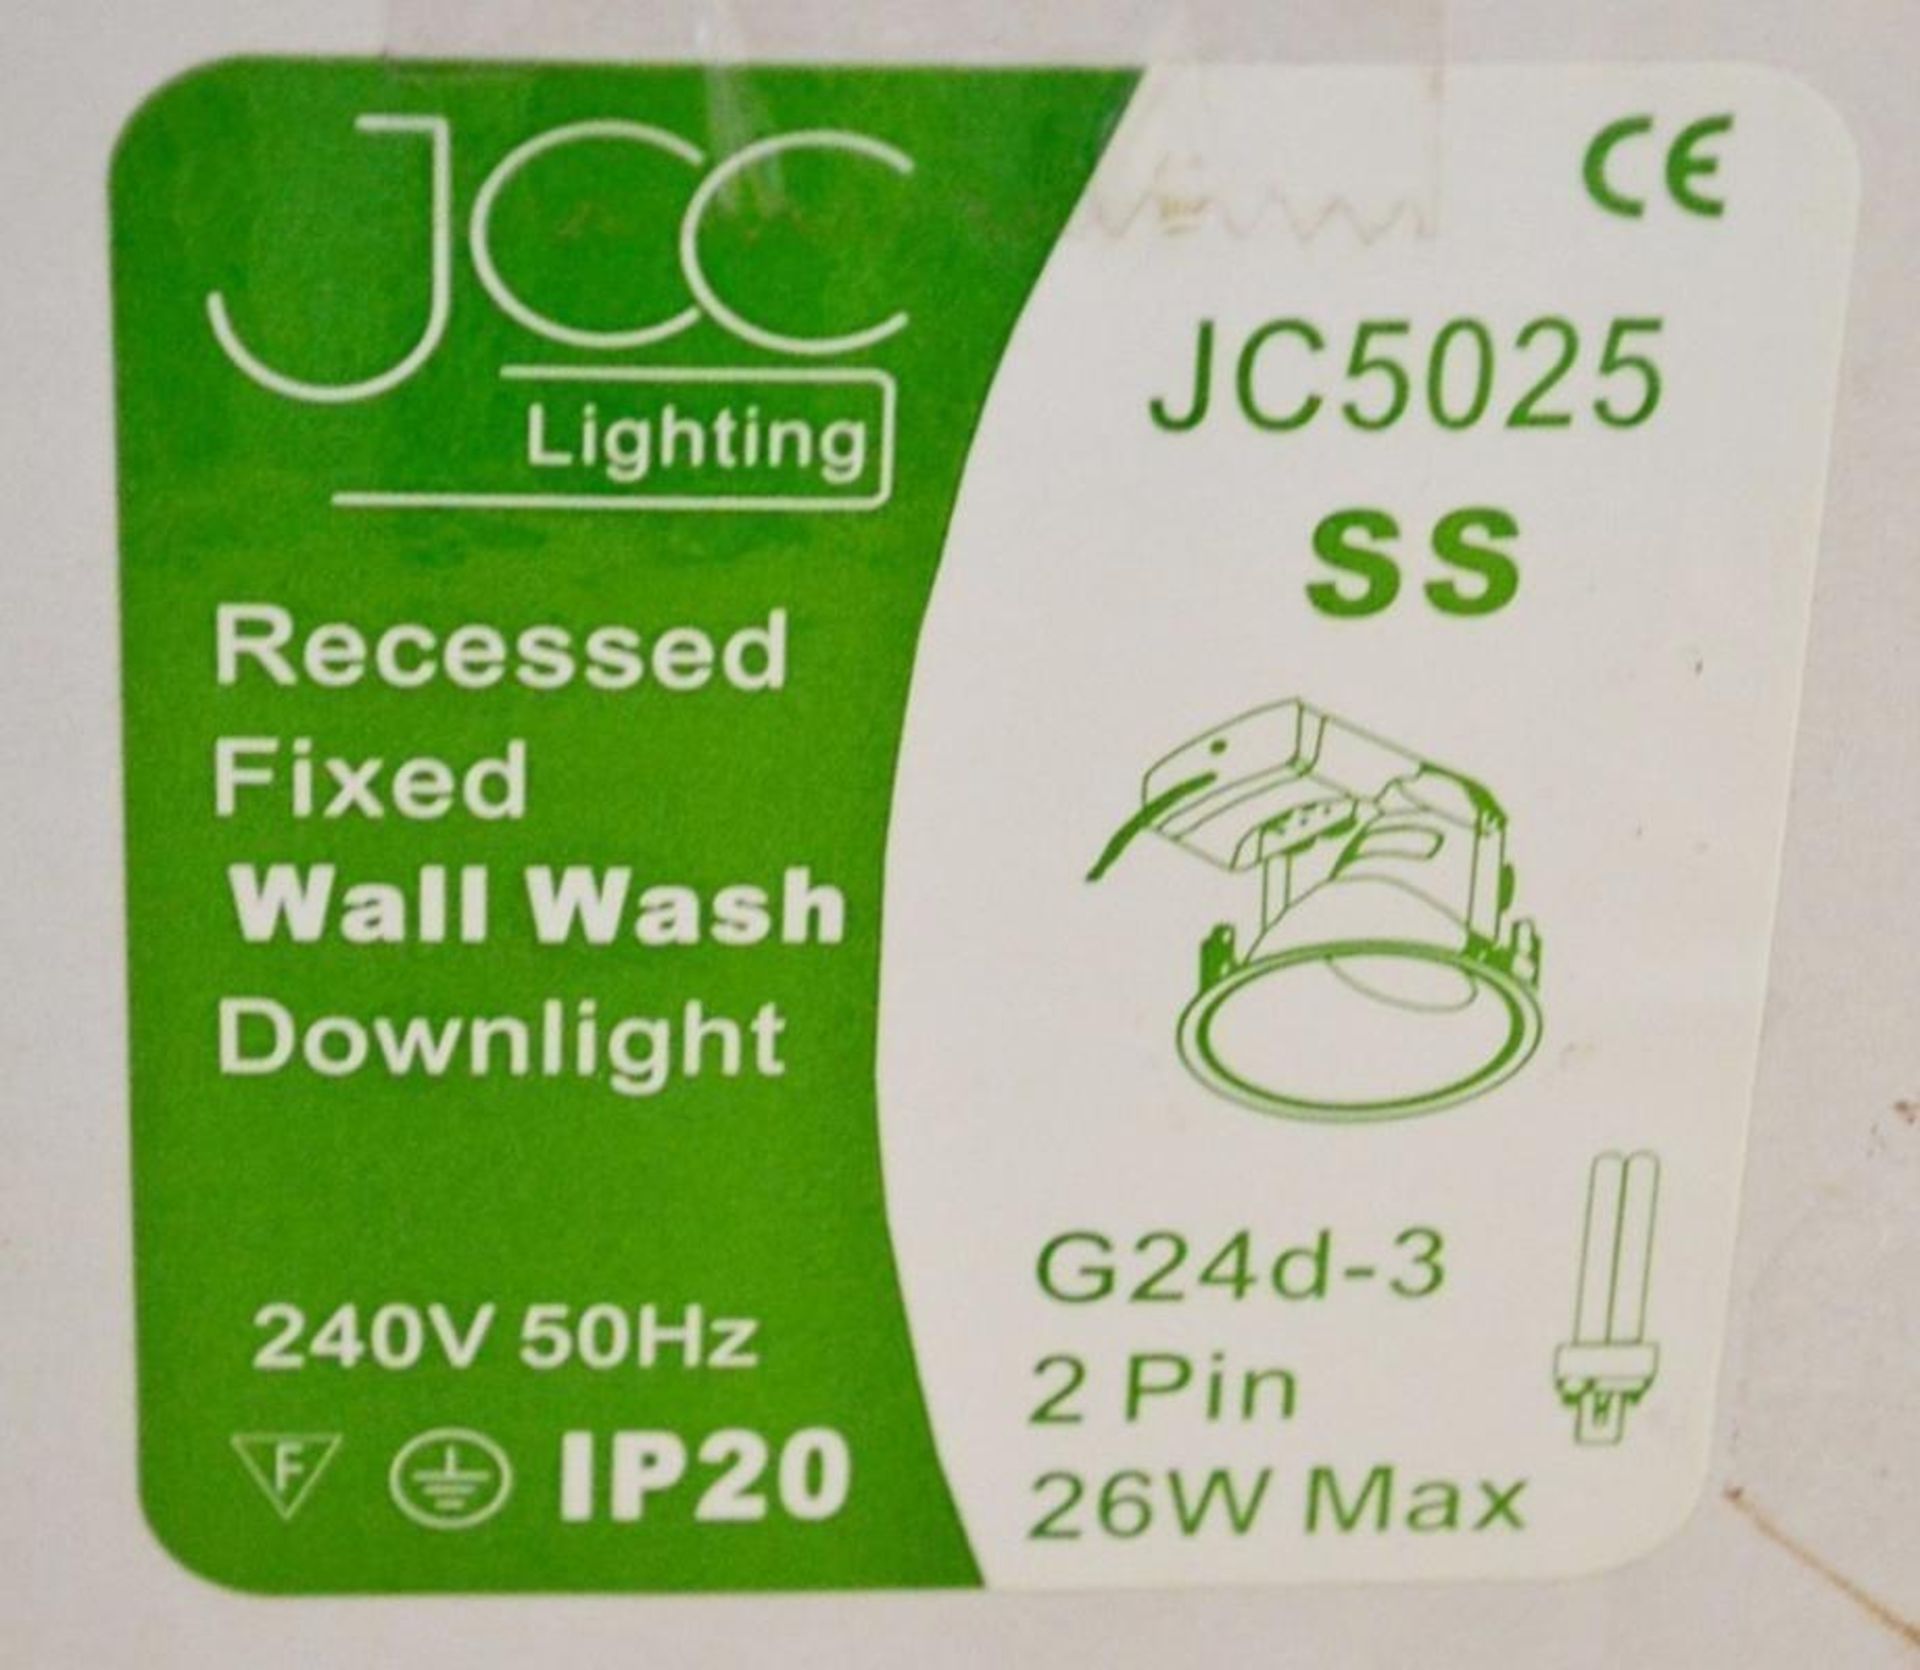 5 x JCC Lighting JC5025 Large Coral Range Commercial Recessed Downlight - Low Energy Mains Voltage - - Image 4 of 5